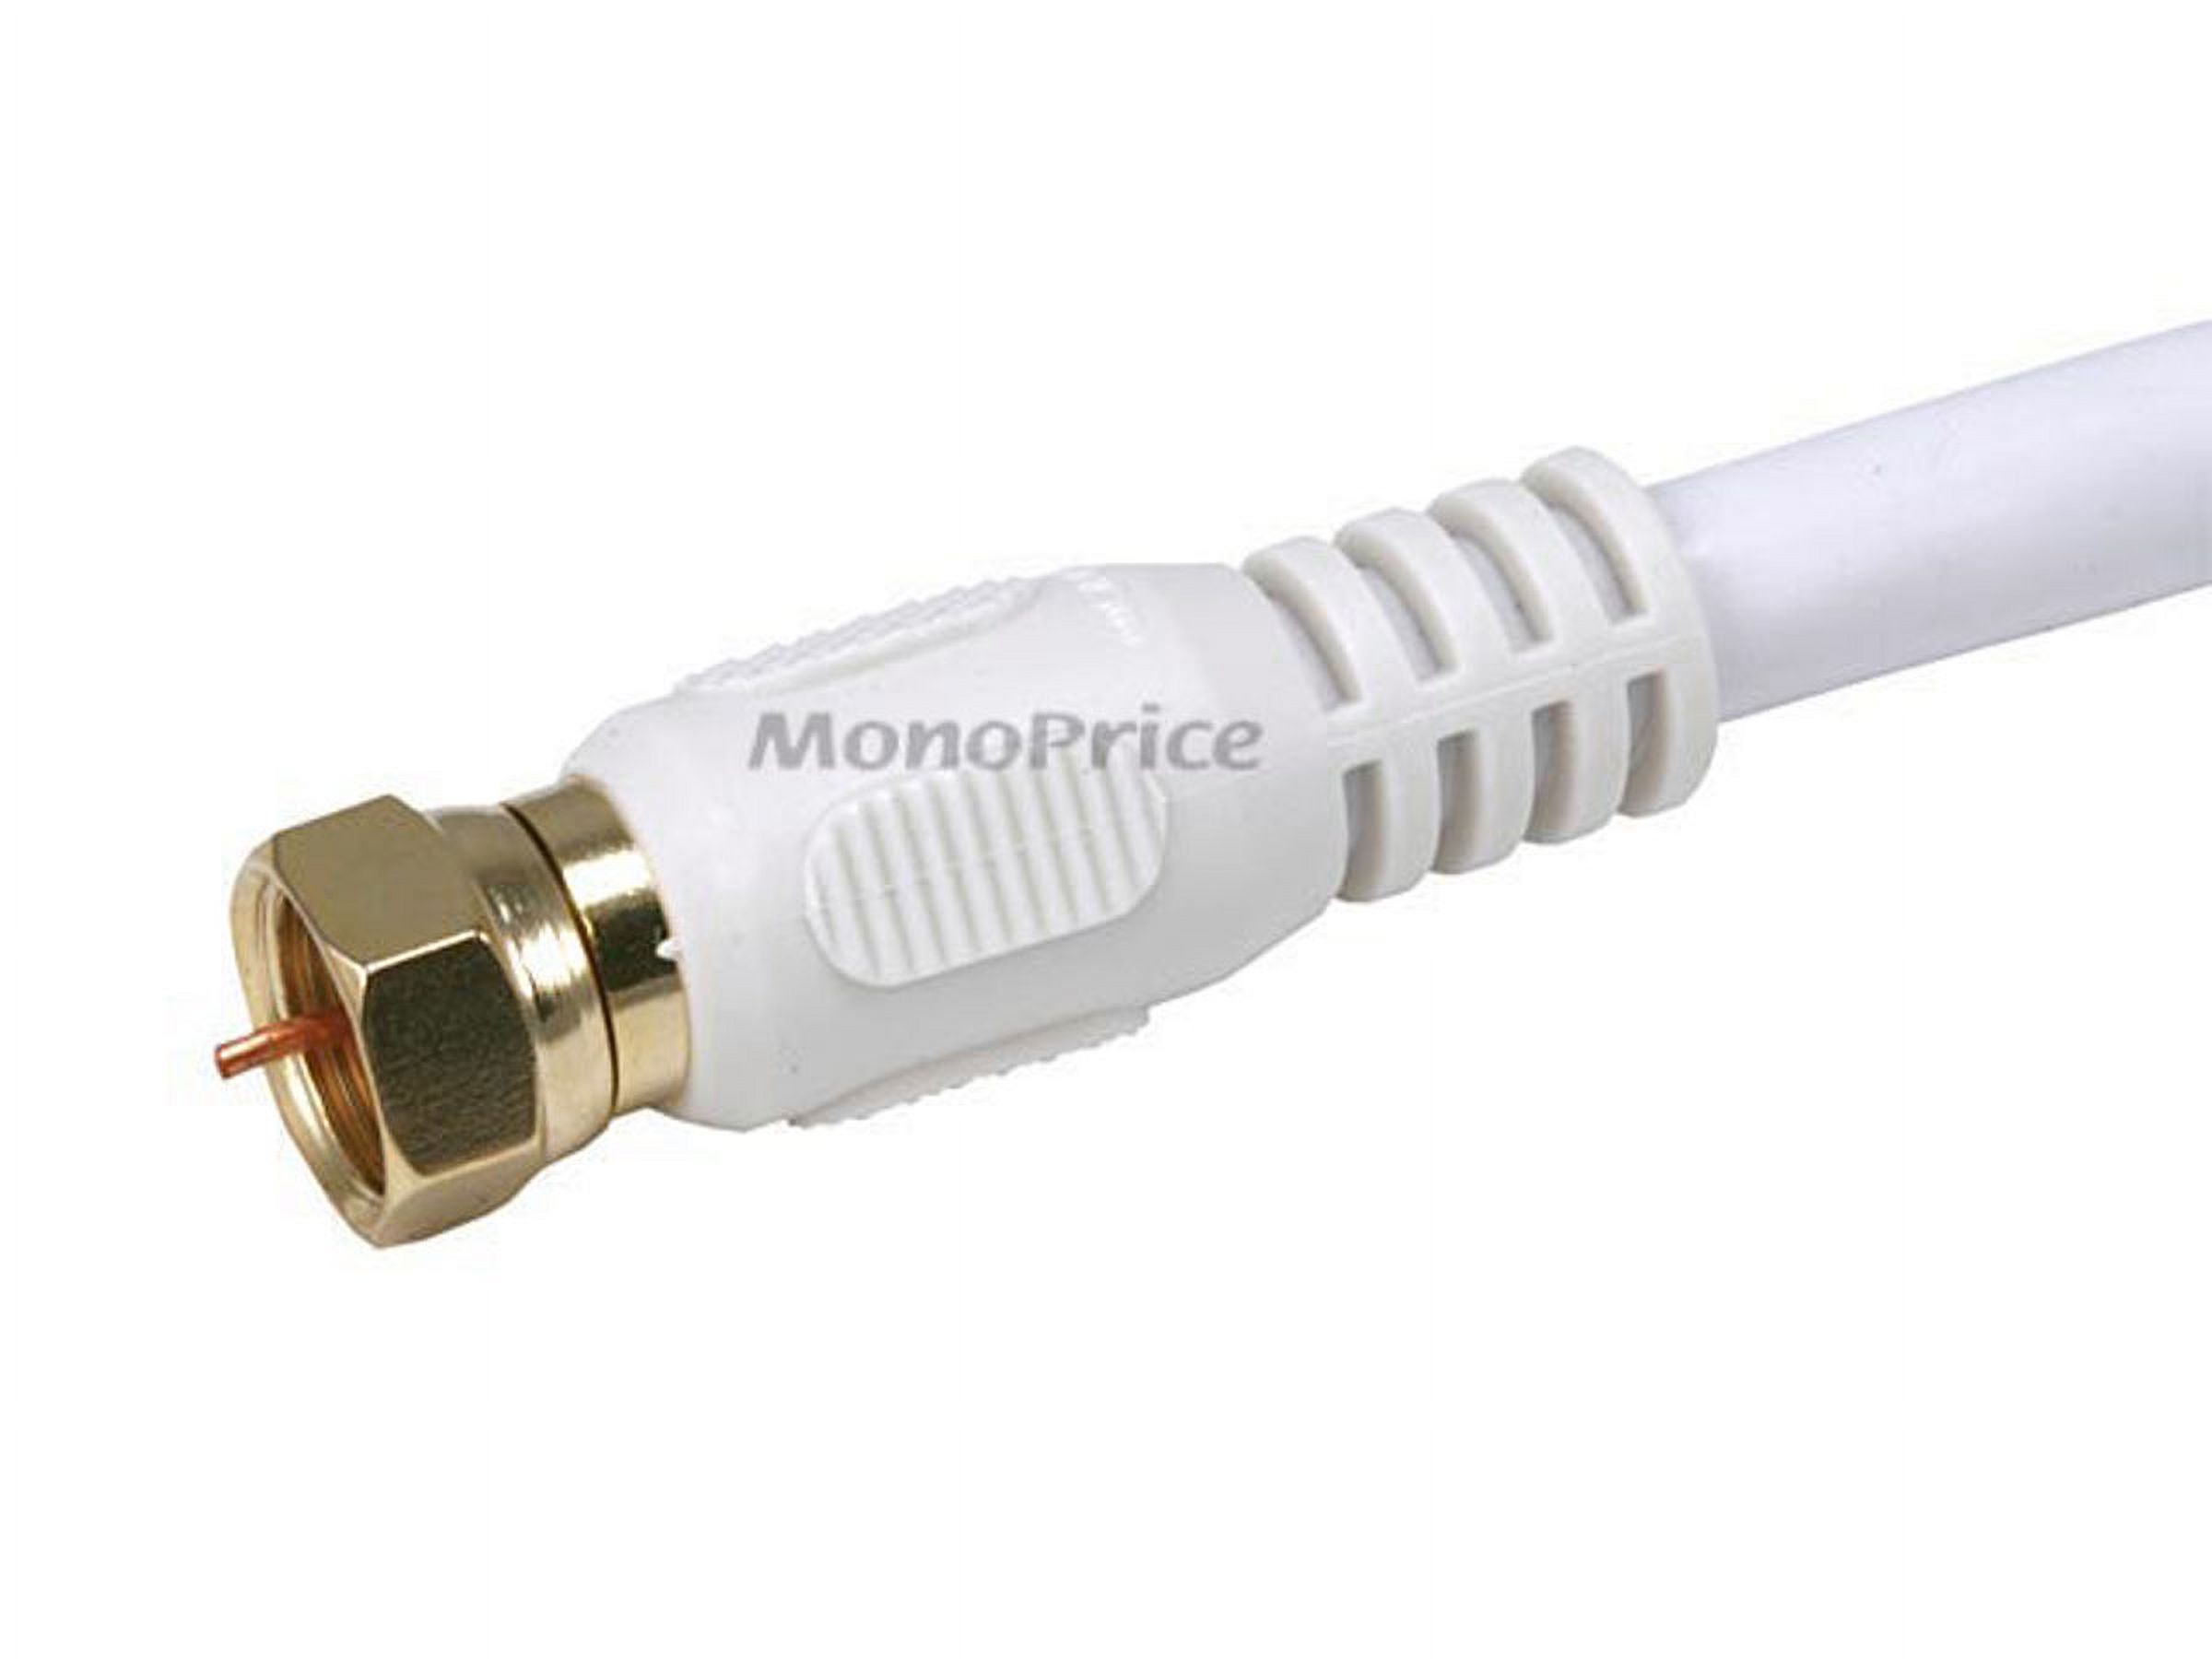 Monoprice 100' CL2 Quad Shielded RG6 F Type 18AWG Coaxial Cable White 104062 - image 2 of 3